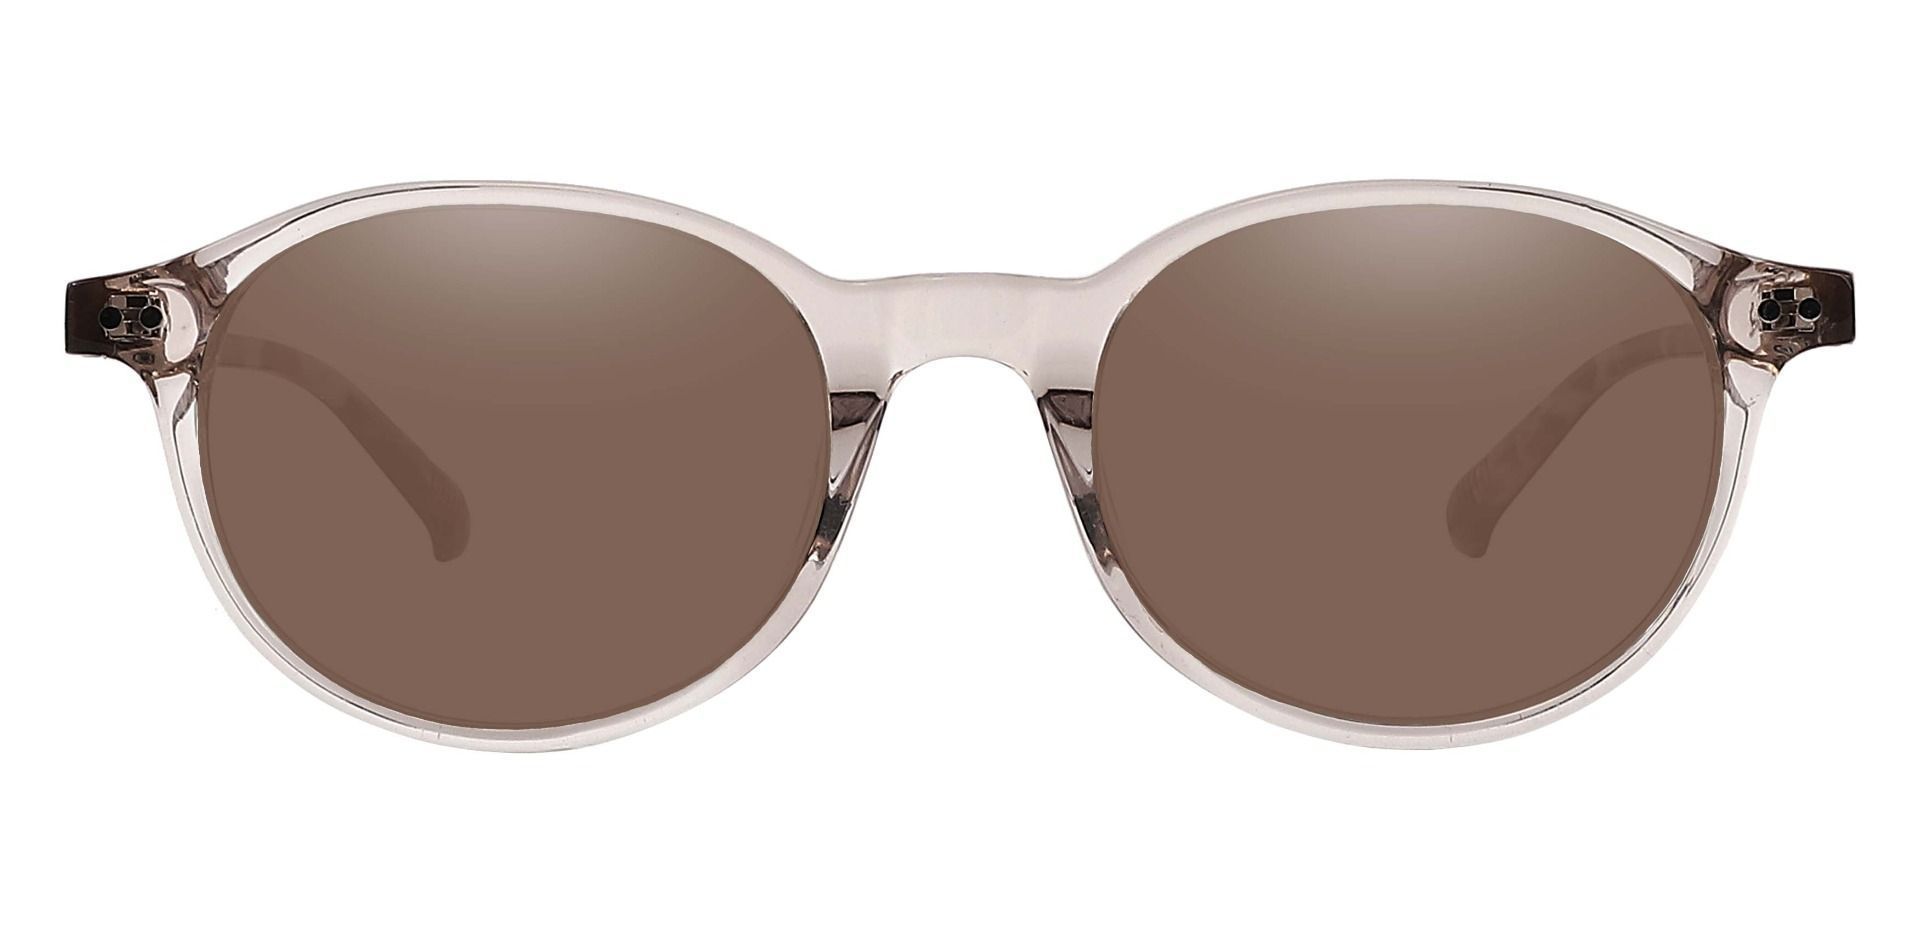 Avon Oval Progressive Sunglasses - Clear Frame With Brown Lenses